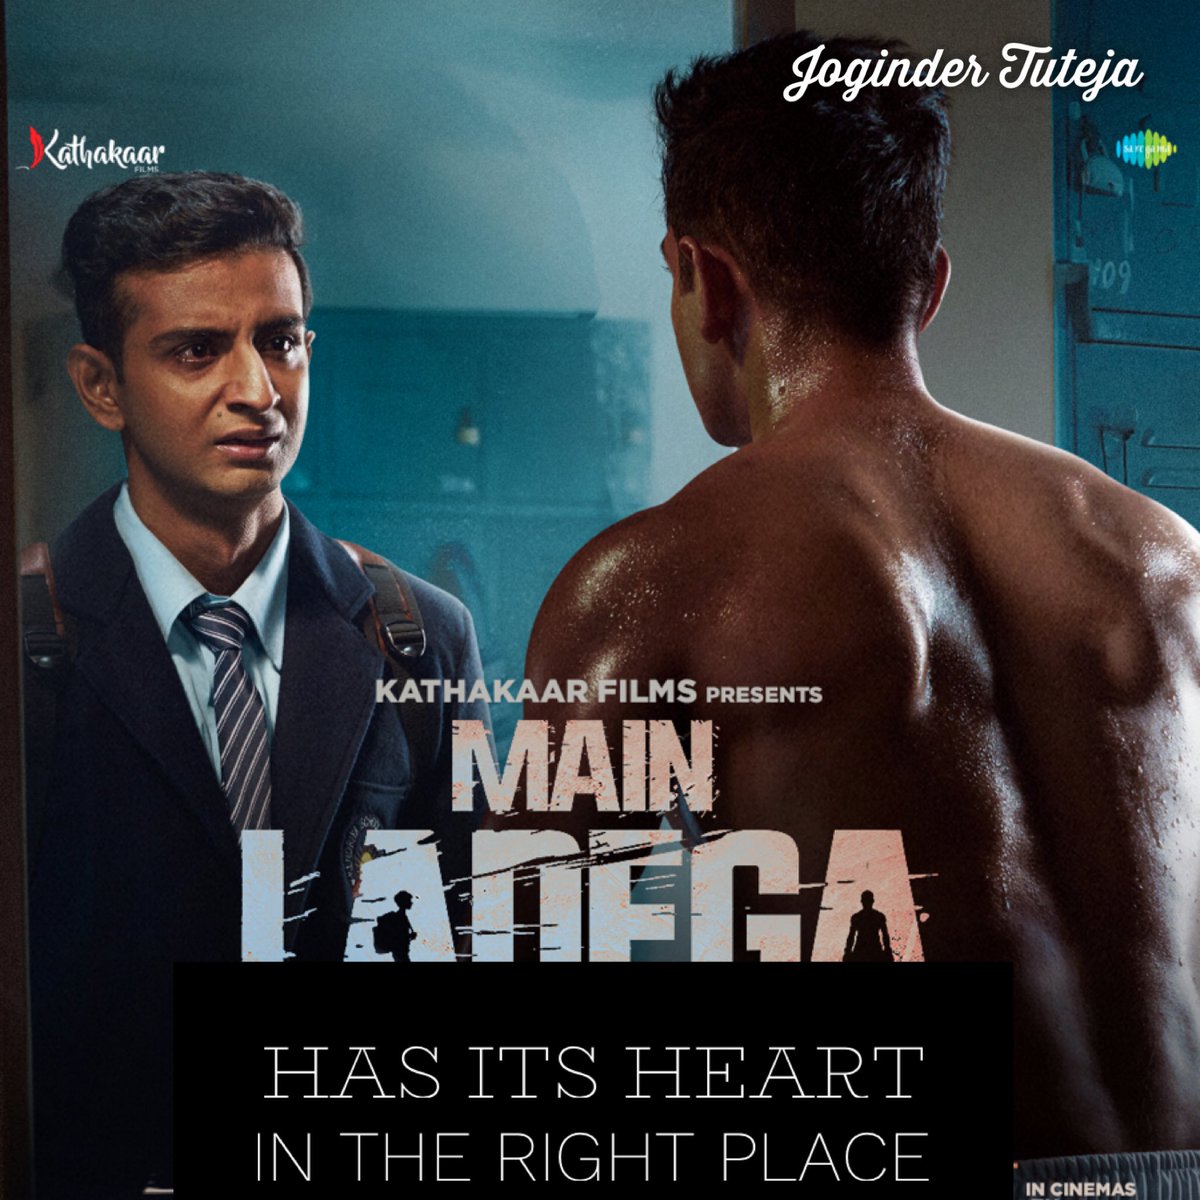 #MainLadega has its heart in its place. There have been many films that have come on boxing but this one doesn’t follow the template, be it the genesis of it all or the way fight scenes in the ring are orchestrated. The film does have a core theme to it and sticks to it without…